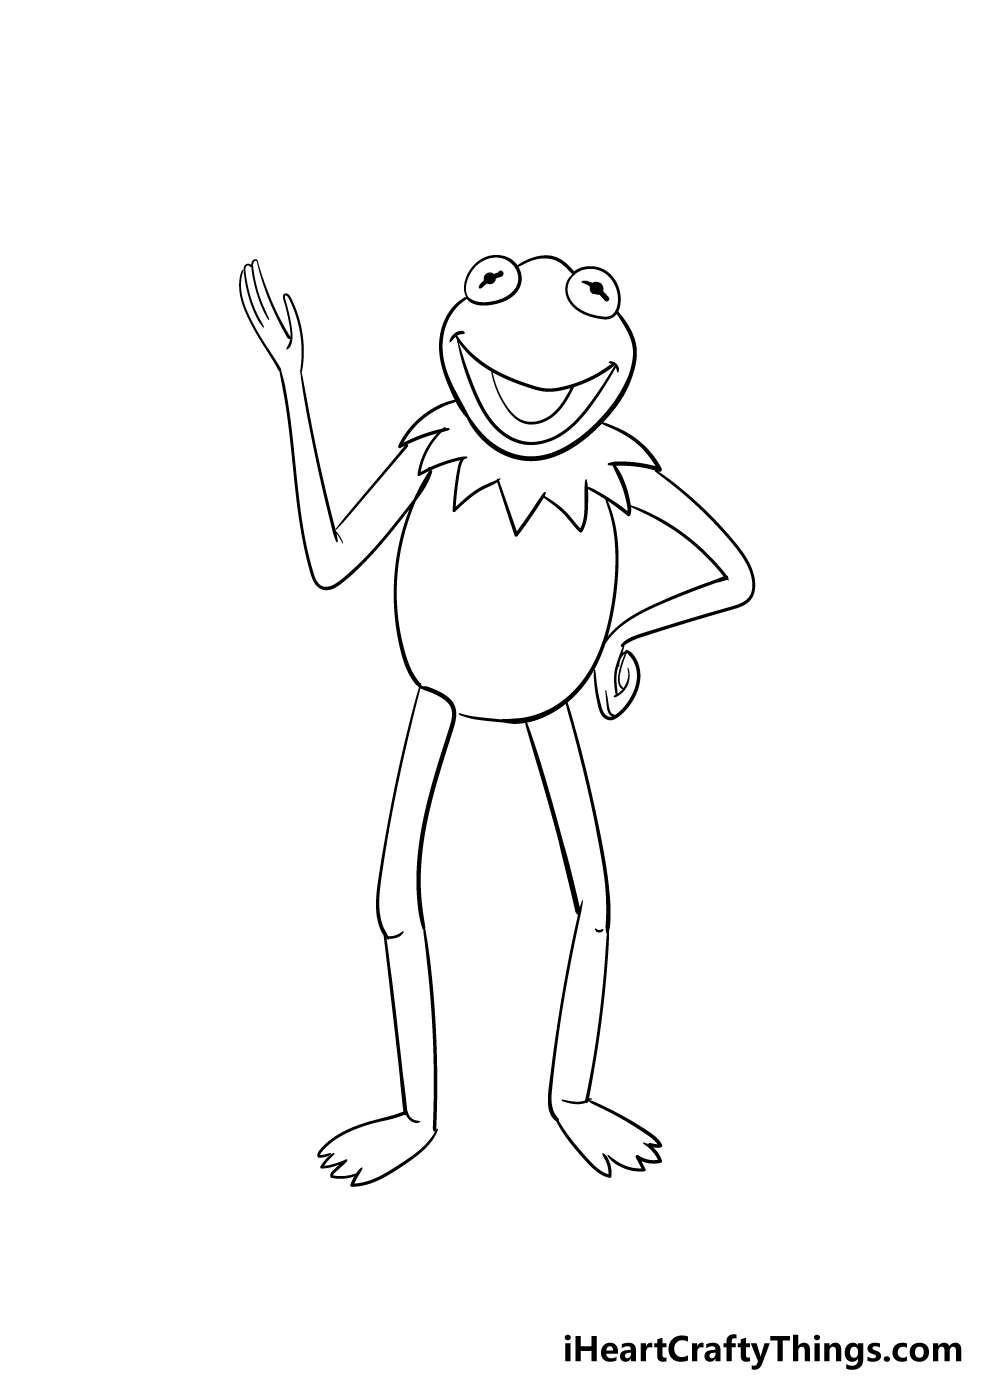 Kermit the frog drawing